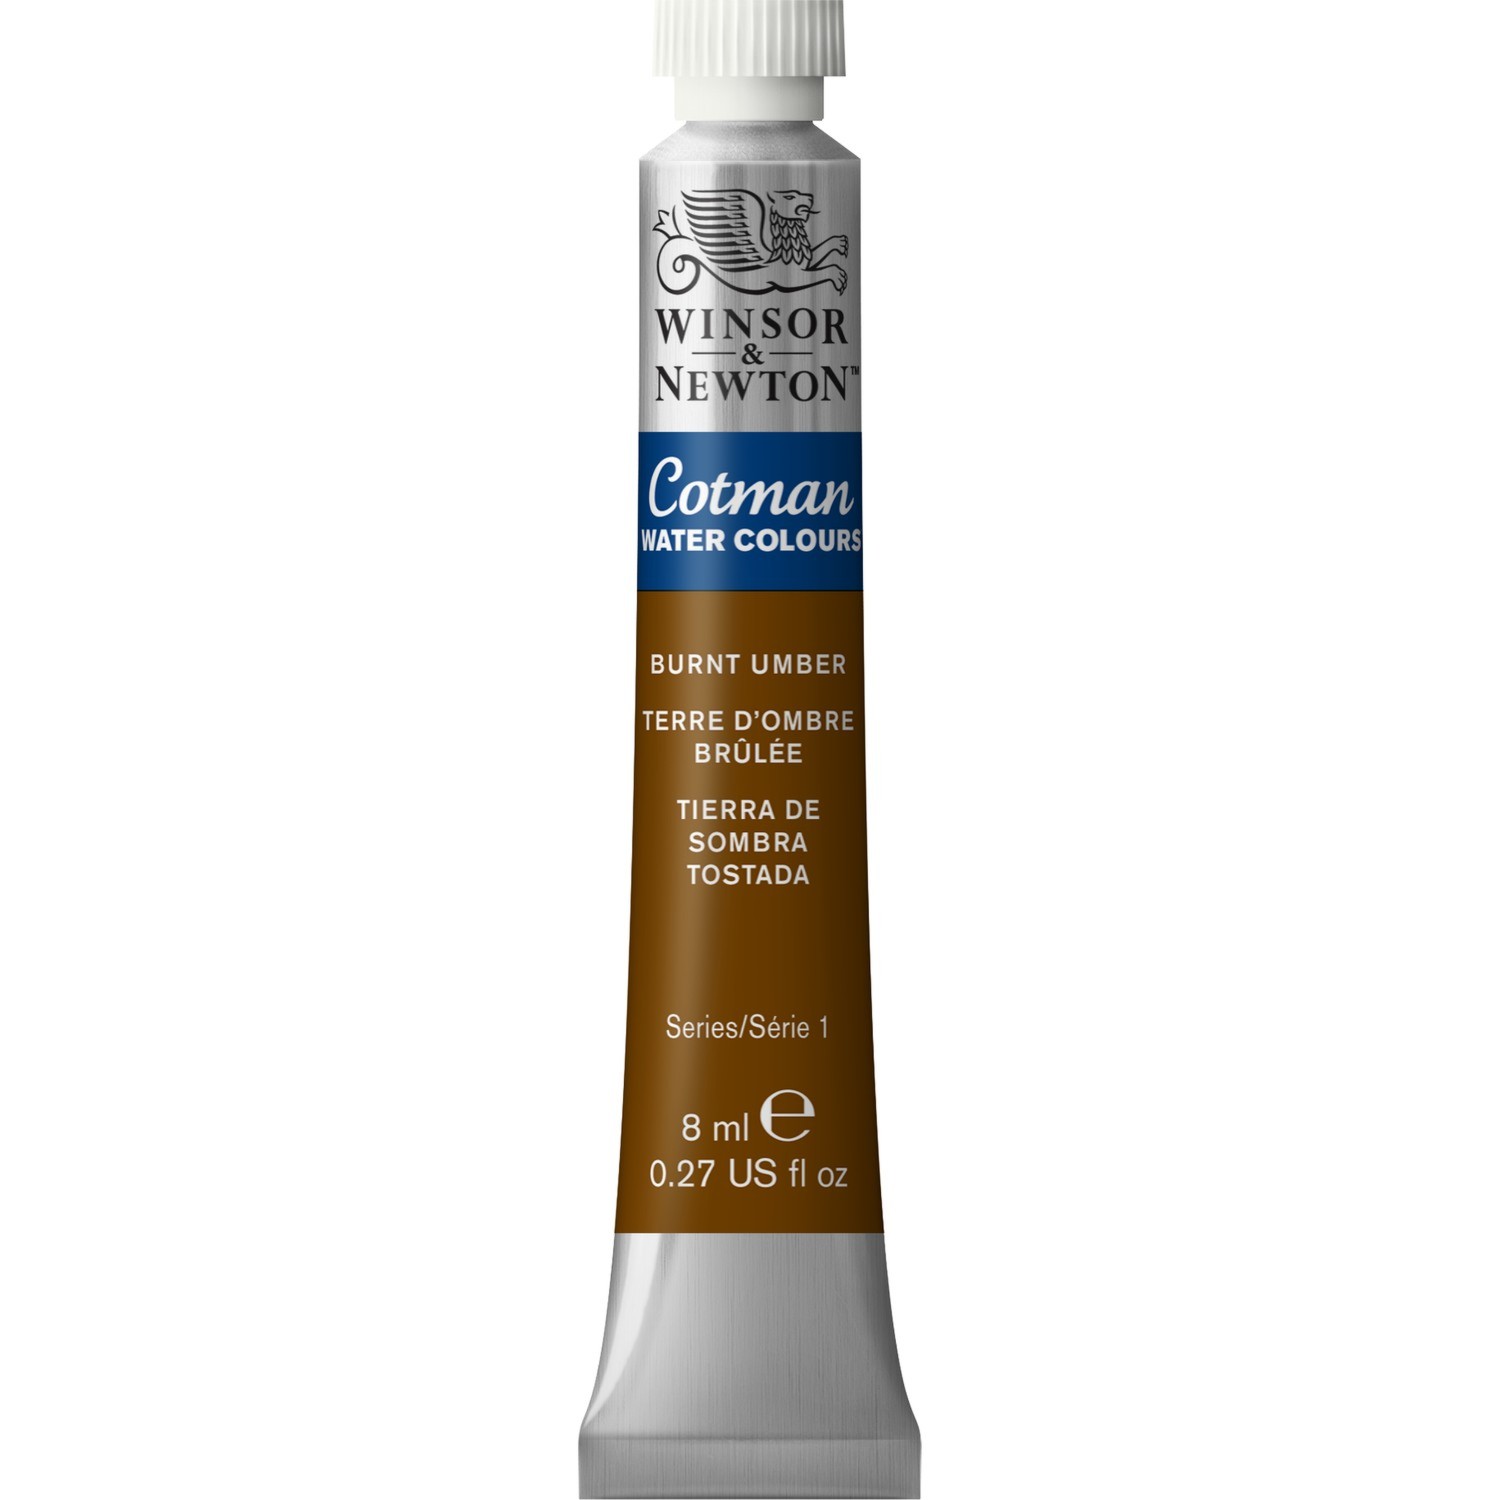 Winsor and Newton Cotman Watercolour Paint - Burnt Umber Image 1